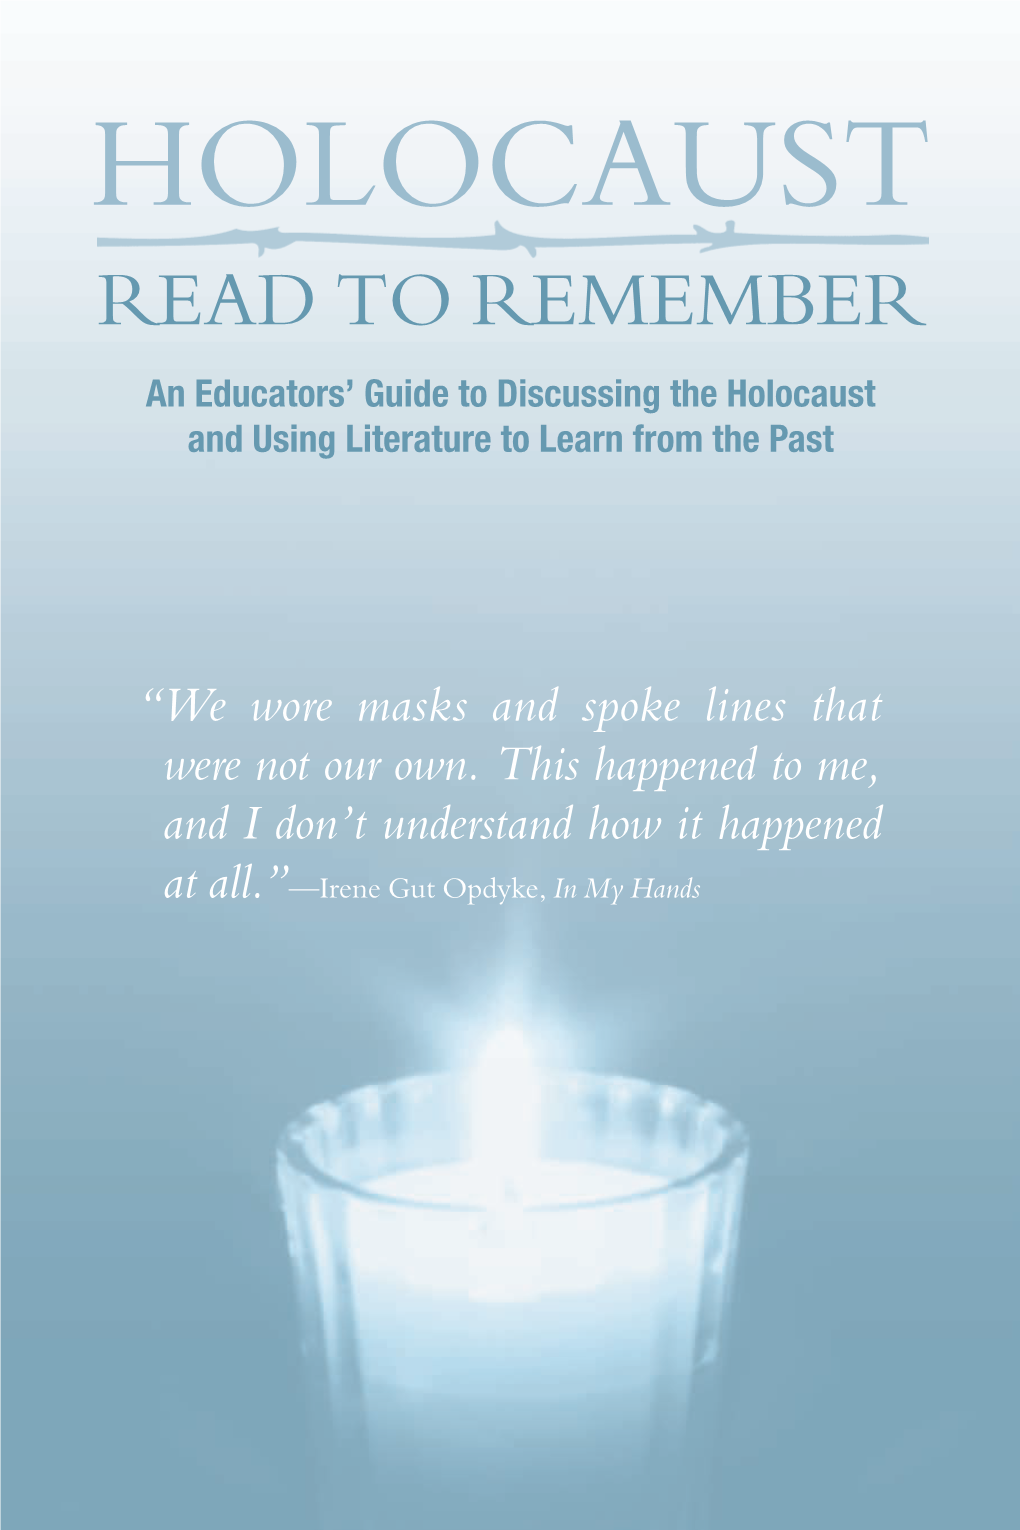 HOLOCAUST READ to REMEMBER an Educators’ Guide to Discussing the Holocaust and Using Literature to Learn from the Past